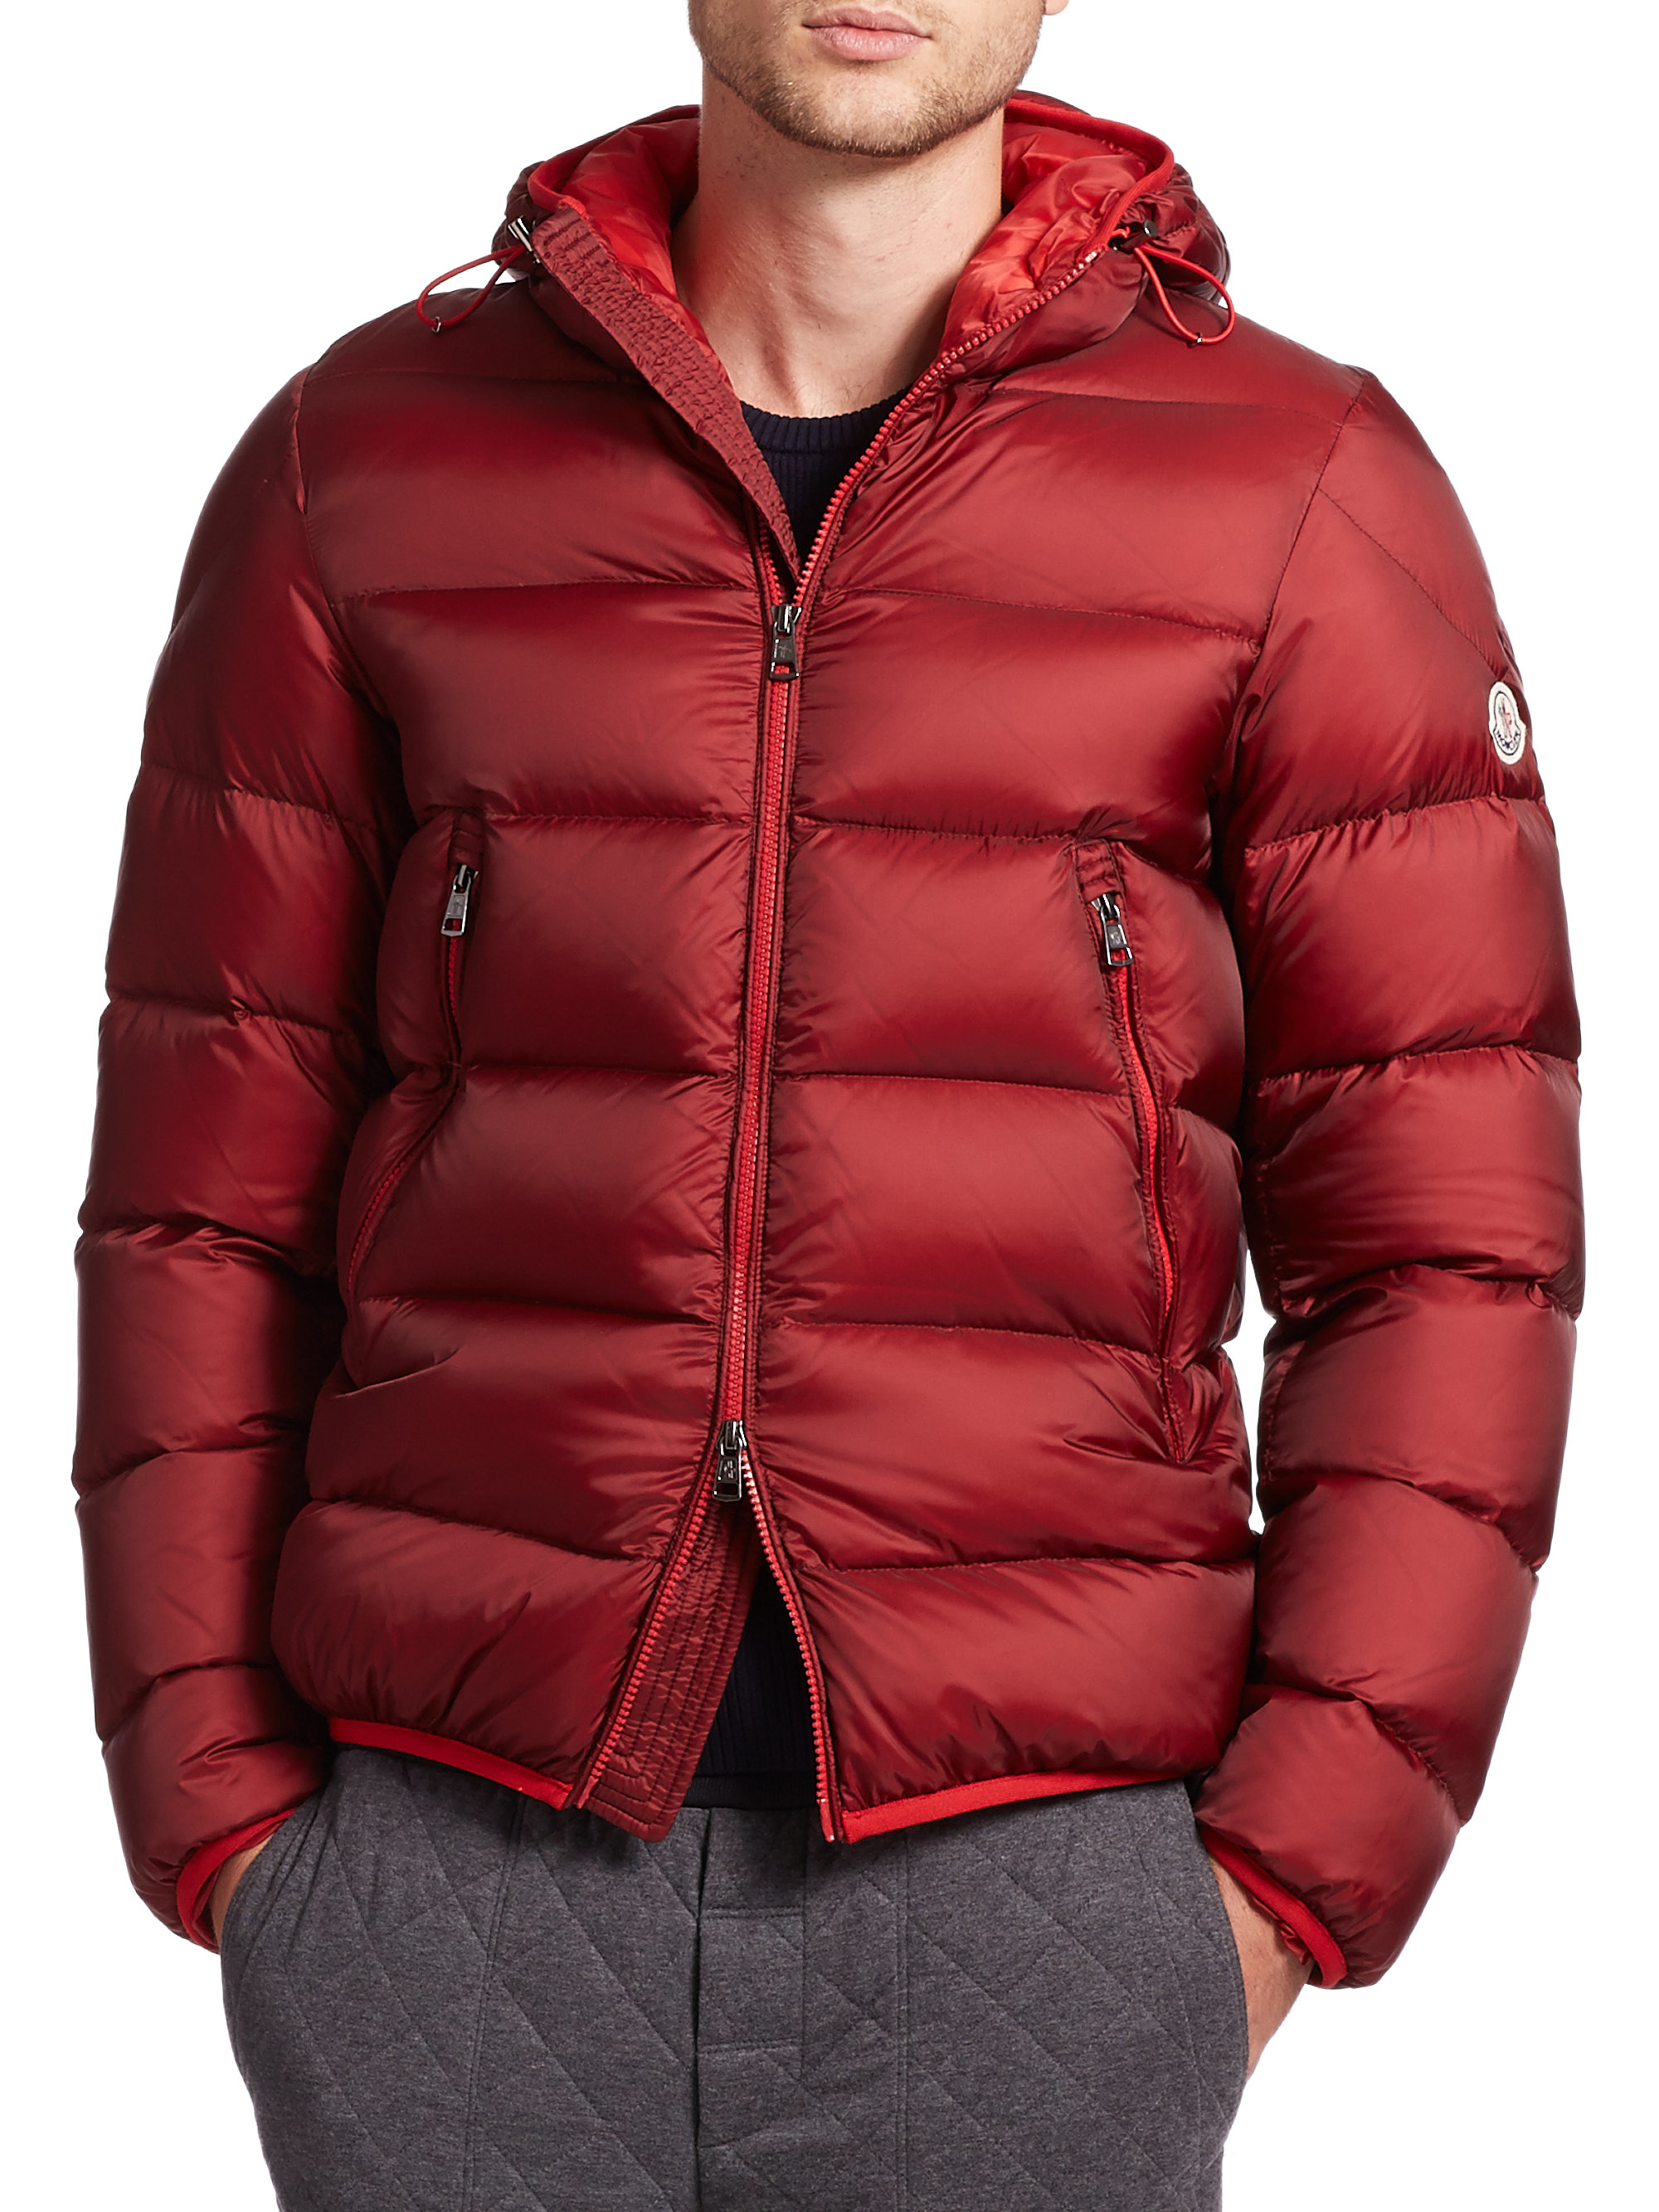 Moncler Synthetic Chauvon Hooded Down Jacket in Red for Men - Lyst